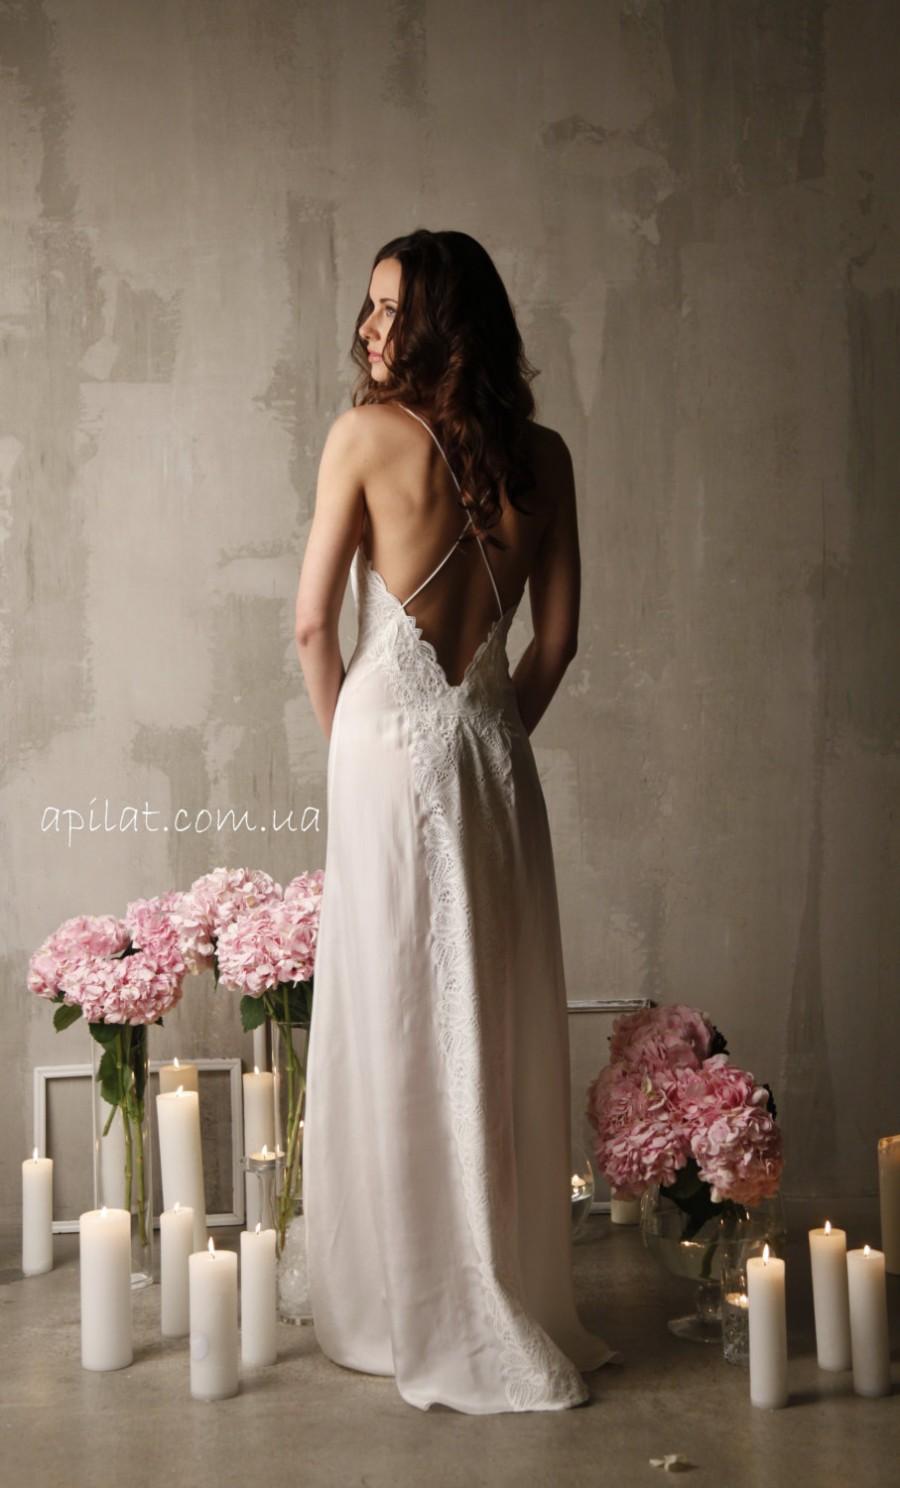 Mariage - Long Silk Bridal Nightgown With Open Back and Lace F12(Lingerie, Nightdress), Bridal Lingerie, Wedding Lingerie, Honeymoon, Christmas Gifts